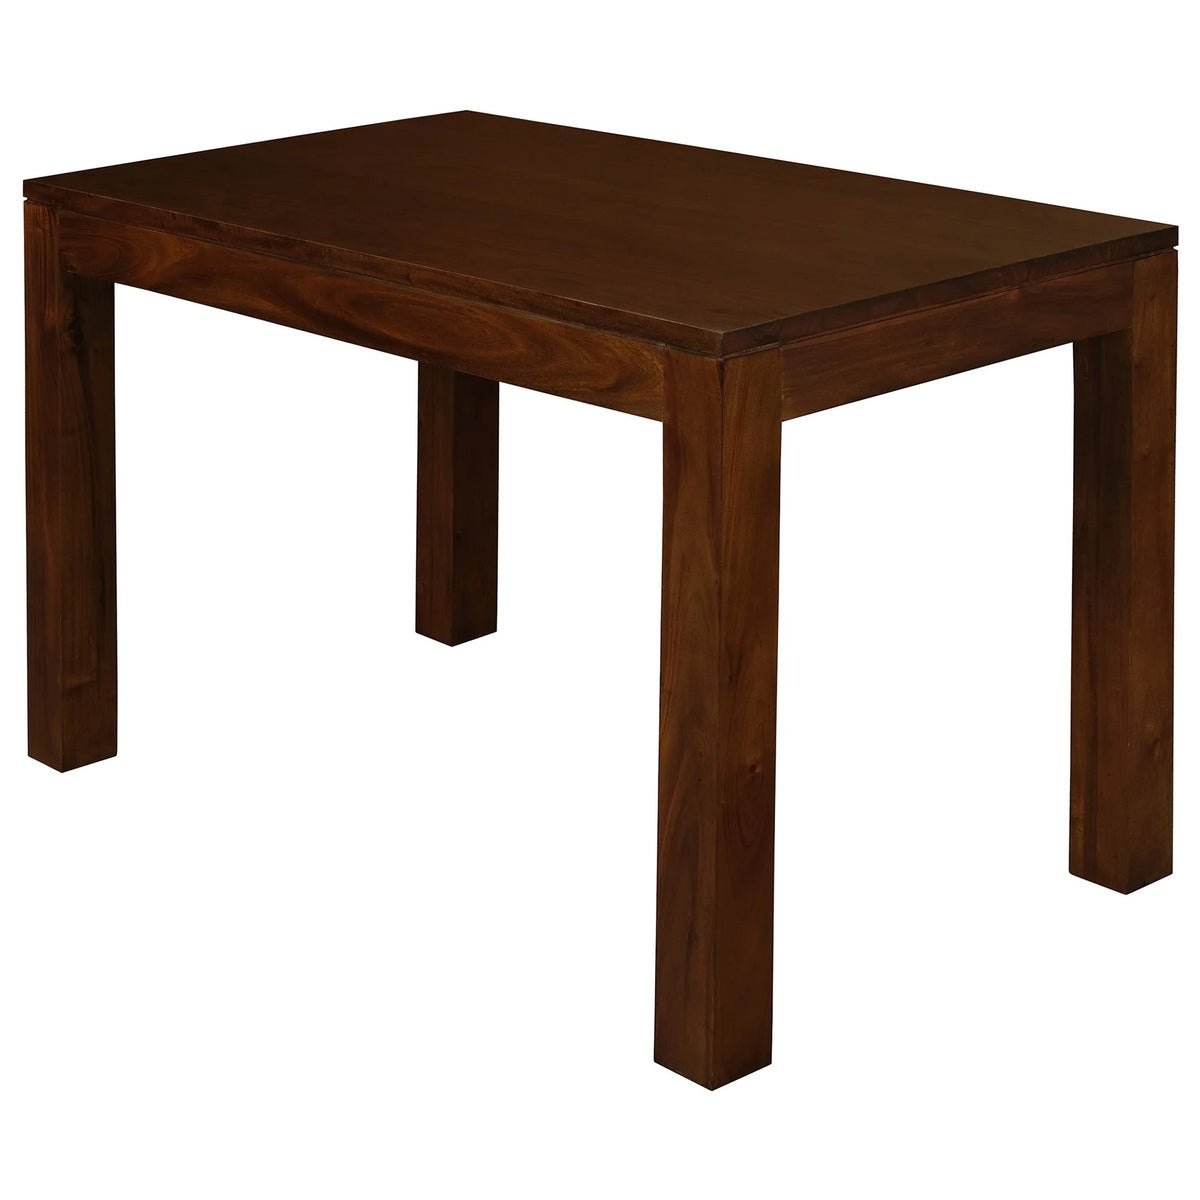 Amsterdam Timber Dining Table in Mahogany - 120cm - Notbrand